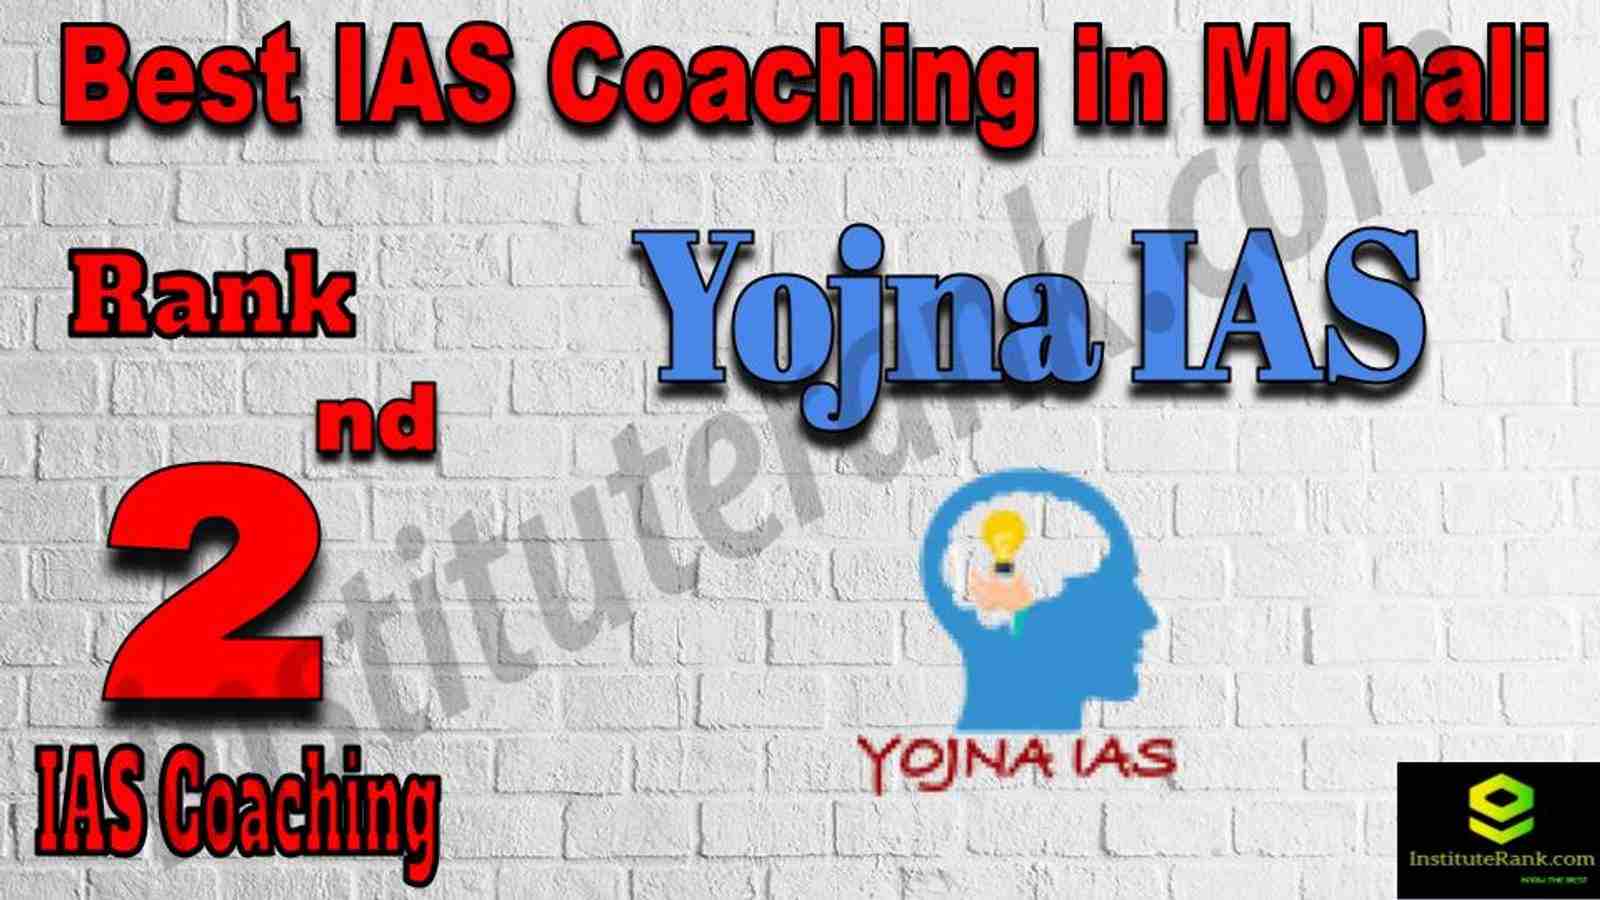 2nd Best IAS Coaching in Mohali